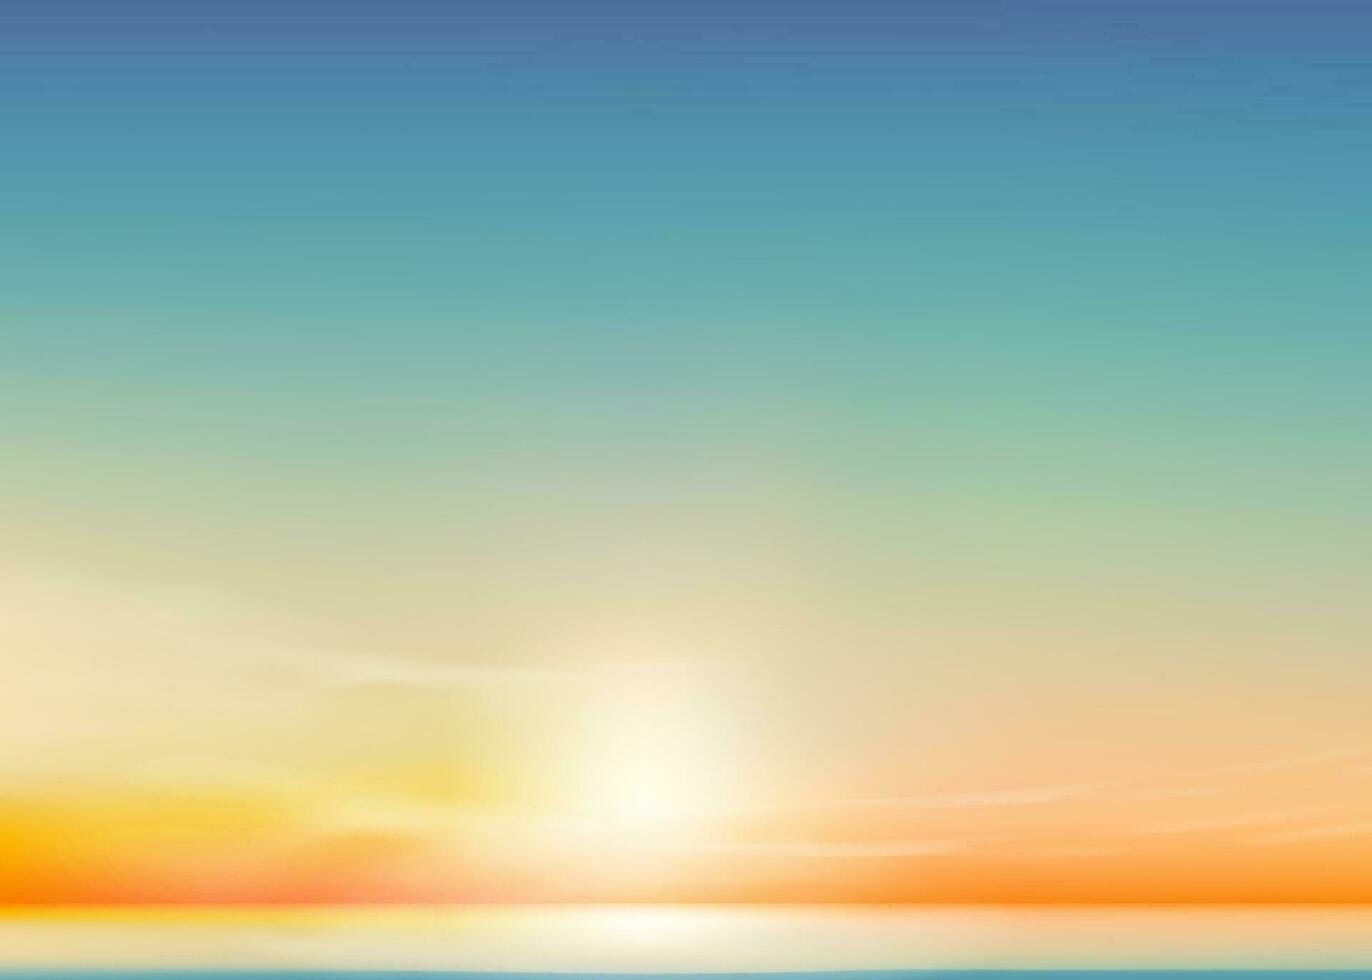 Sunset Sky Blue Background,Horizon Spring Sunrise Sky,Cloud with Orange,Yellow,Green over Sea Beach,Vector Panoramic Summer Banner Beautiful Sweet in Nature Romantic Sky in Evening for Travel,Holiday vector